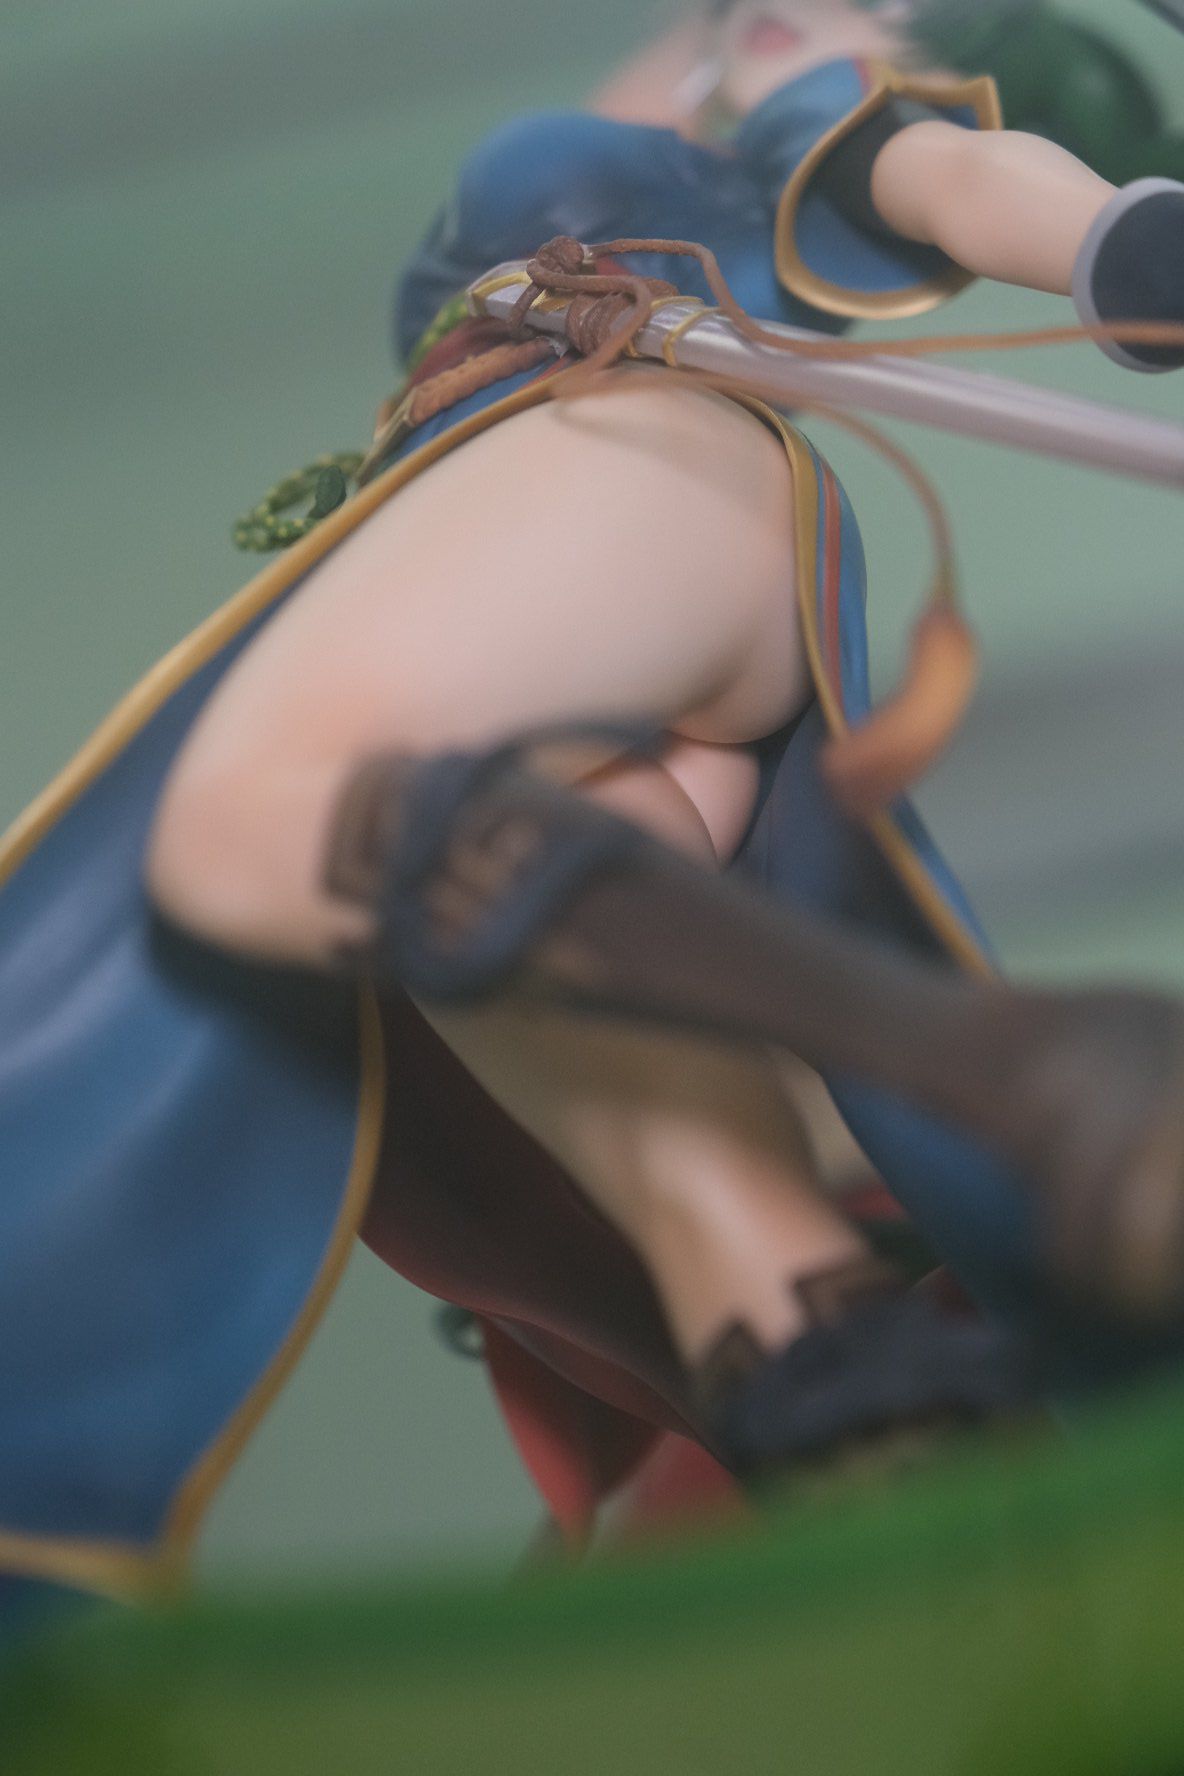 [Sad news] Fire Emblem will release a figure that is too erotic 3